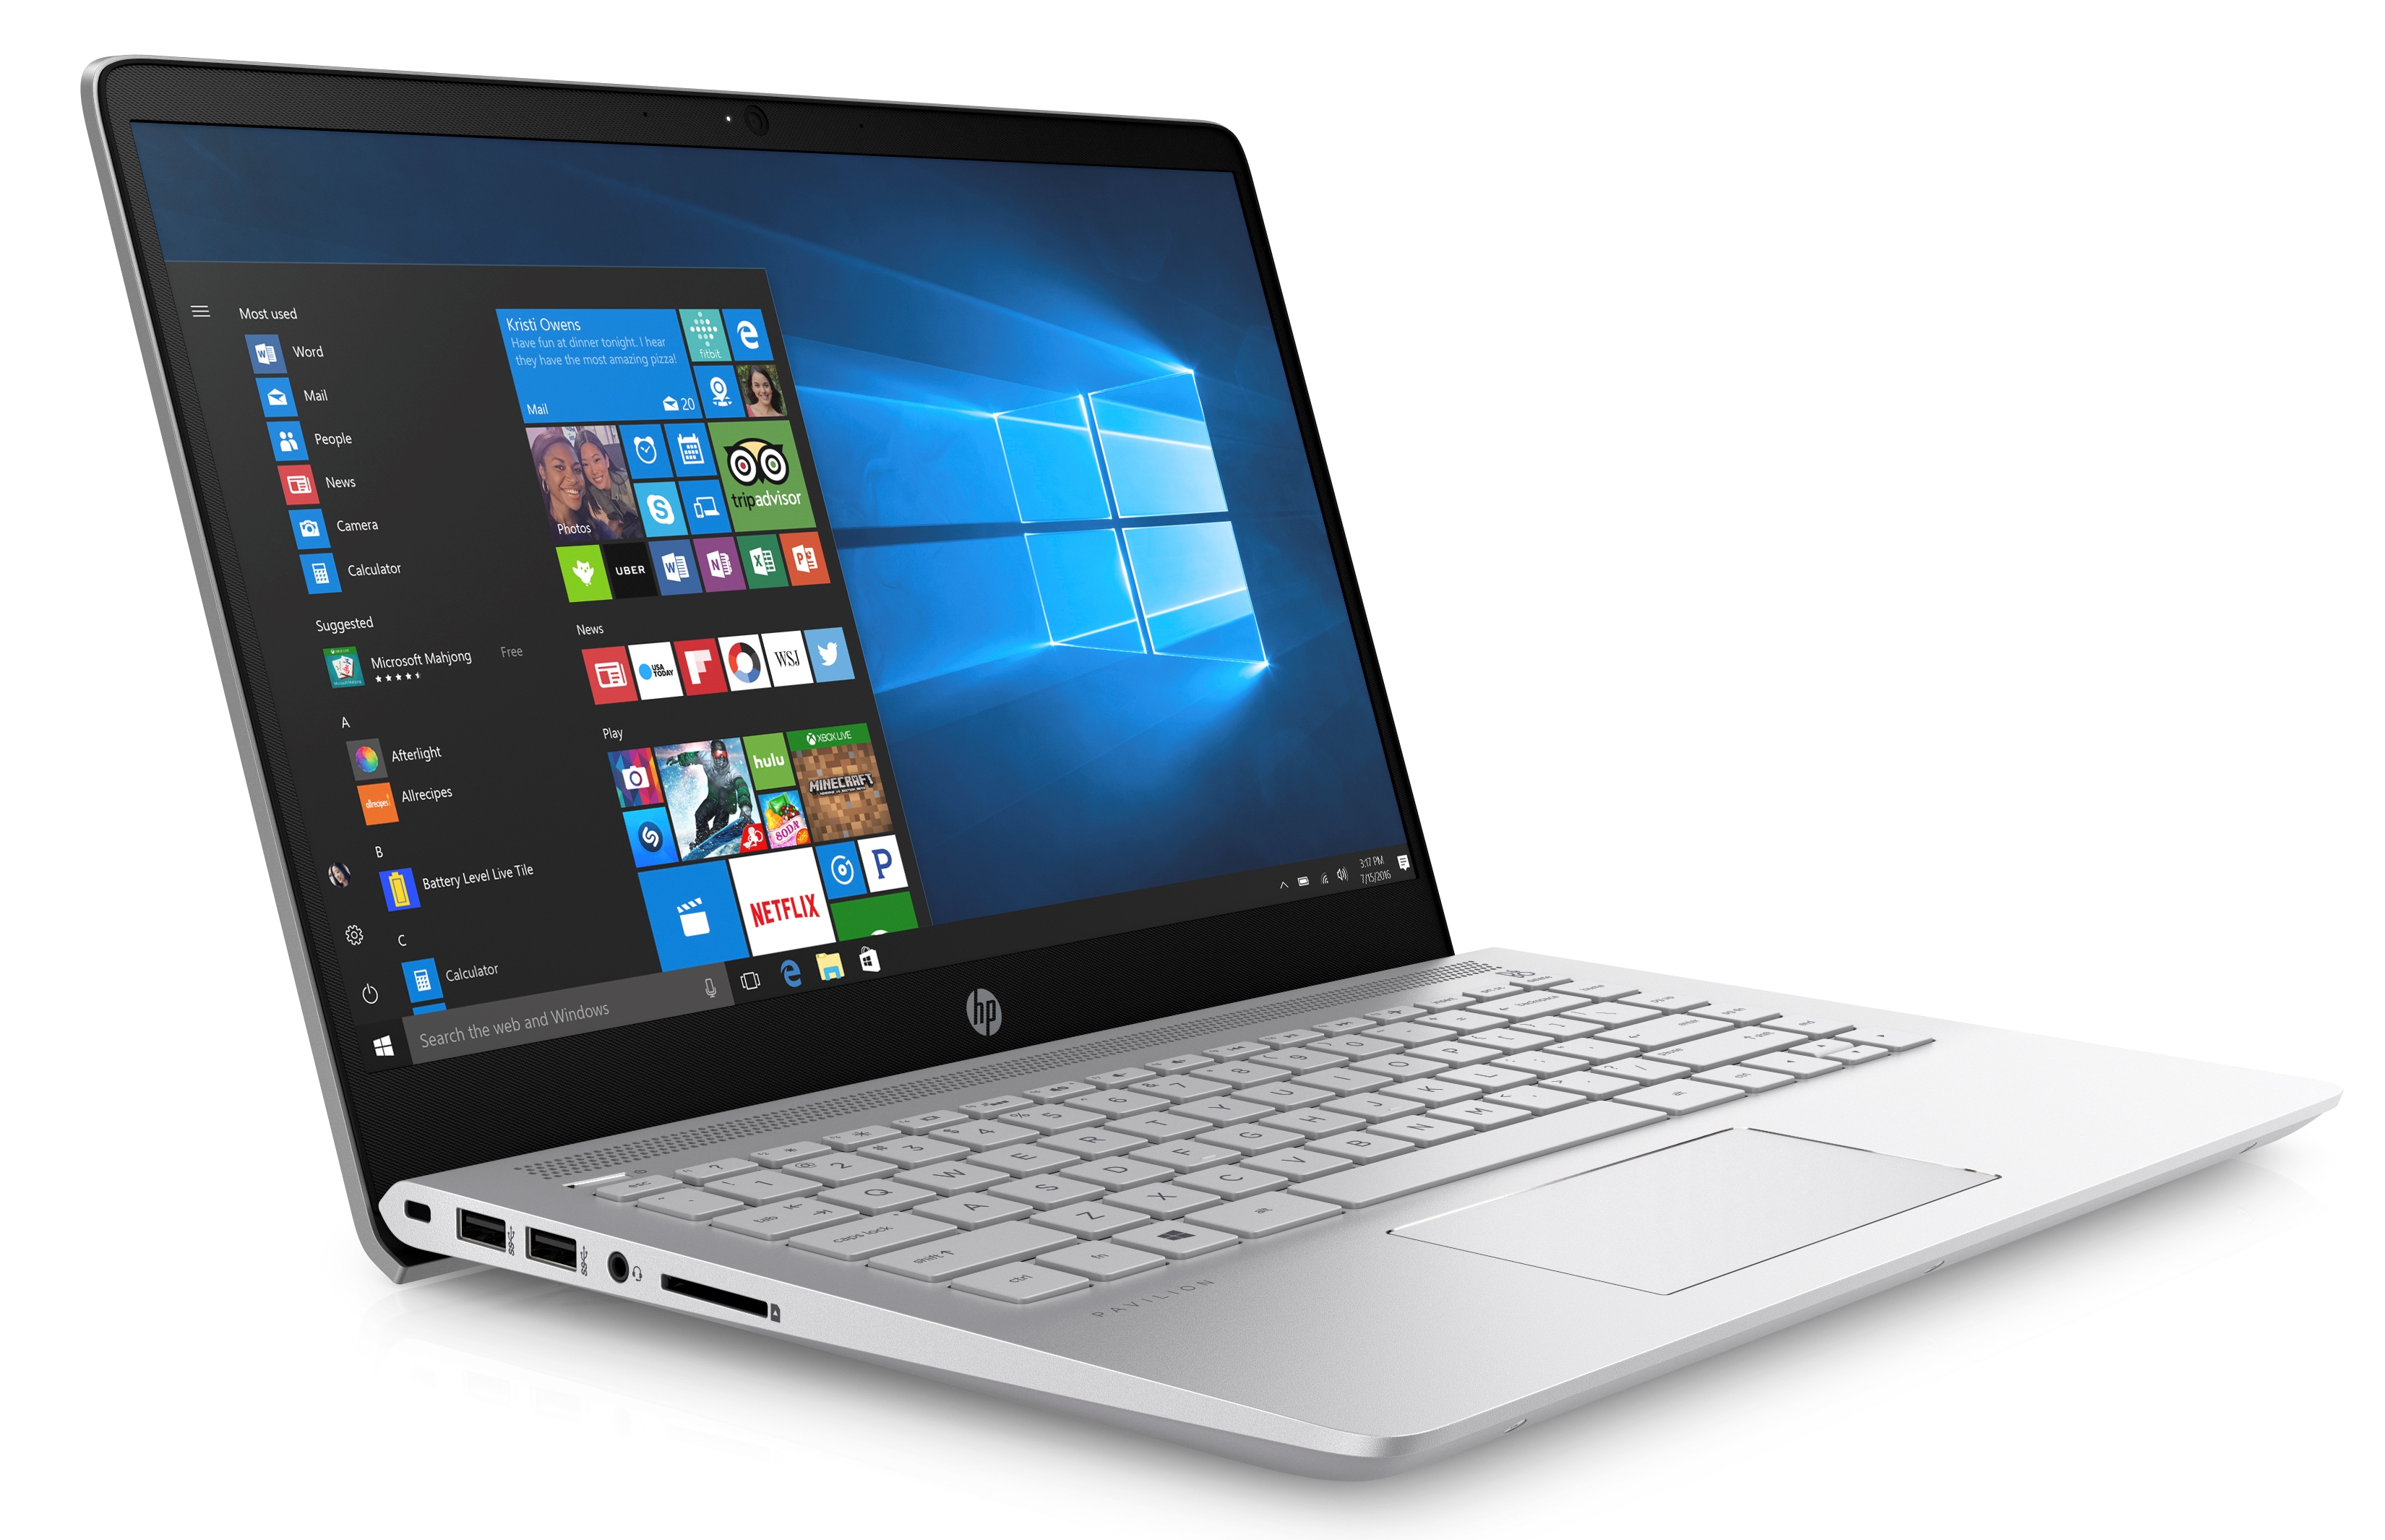 HP refreshes Pavilion and Pavilion x360 series for 2017 - NotebookCheck.net News